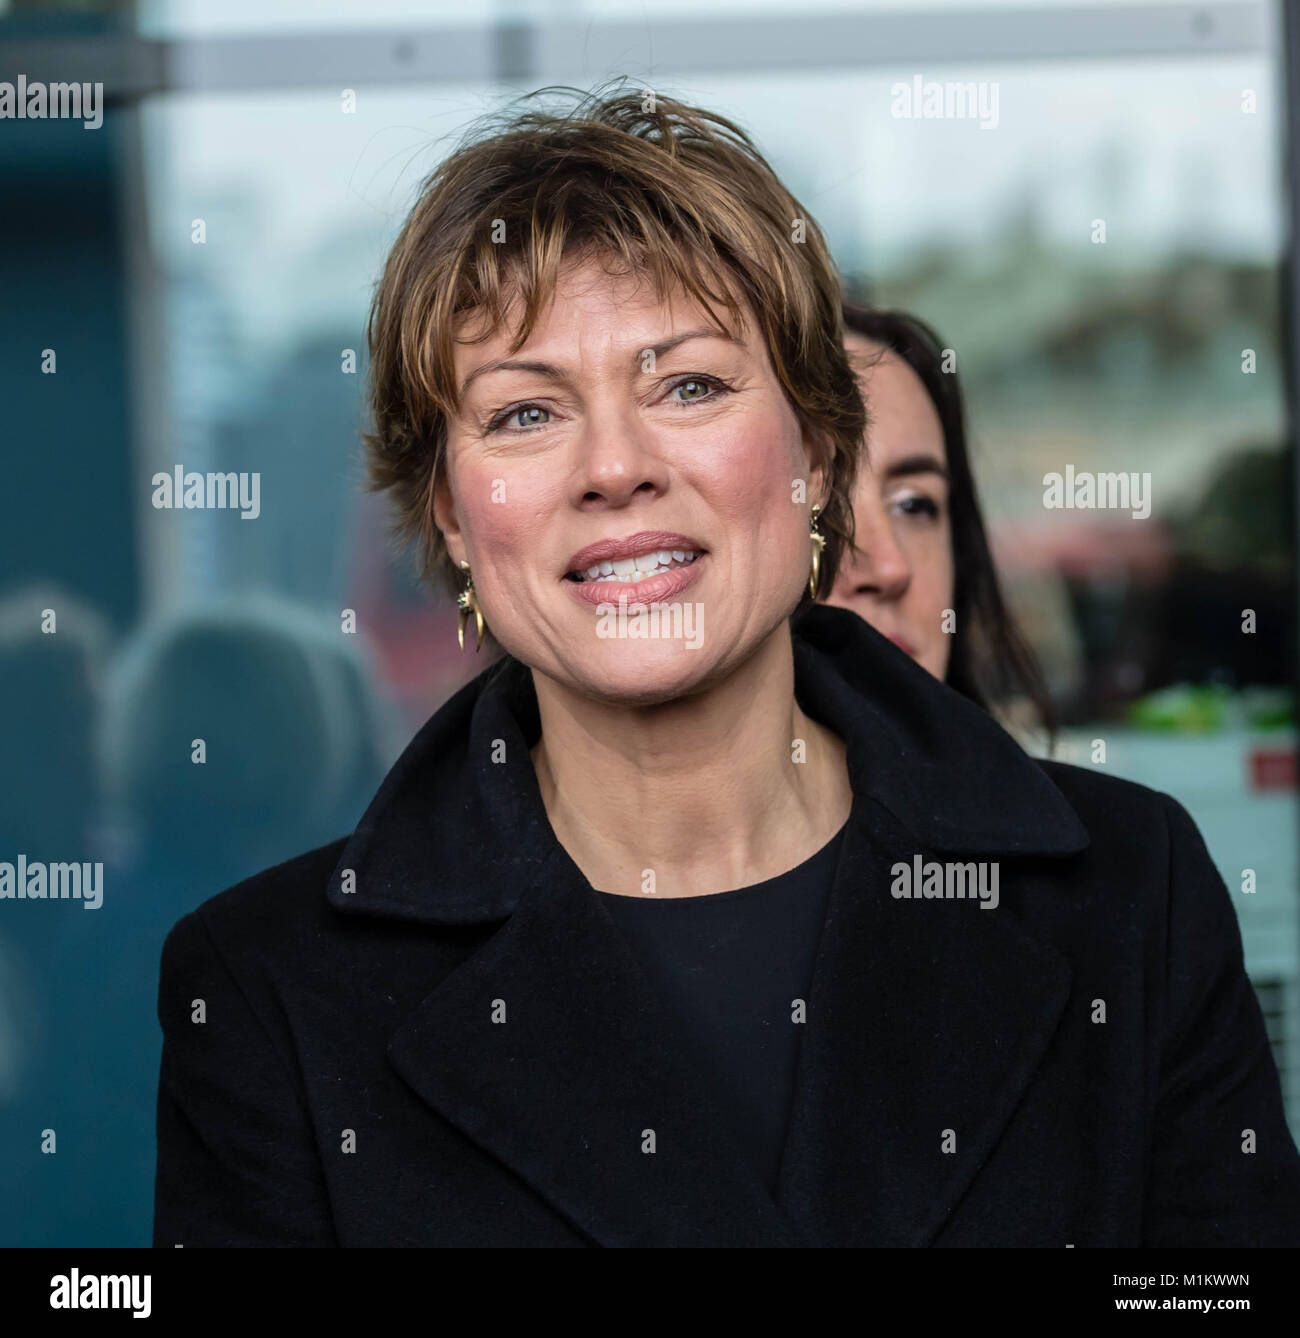 London, UK. 31st January 2018.  Female BBC presenters and staff arrive at the Select committee hearing on S BBC pay.  Pictured Kate Silverton, BBC news presenter  Credit Ian Davidson/Alamy Live News Stock Photo